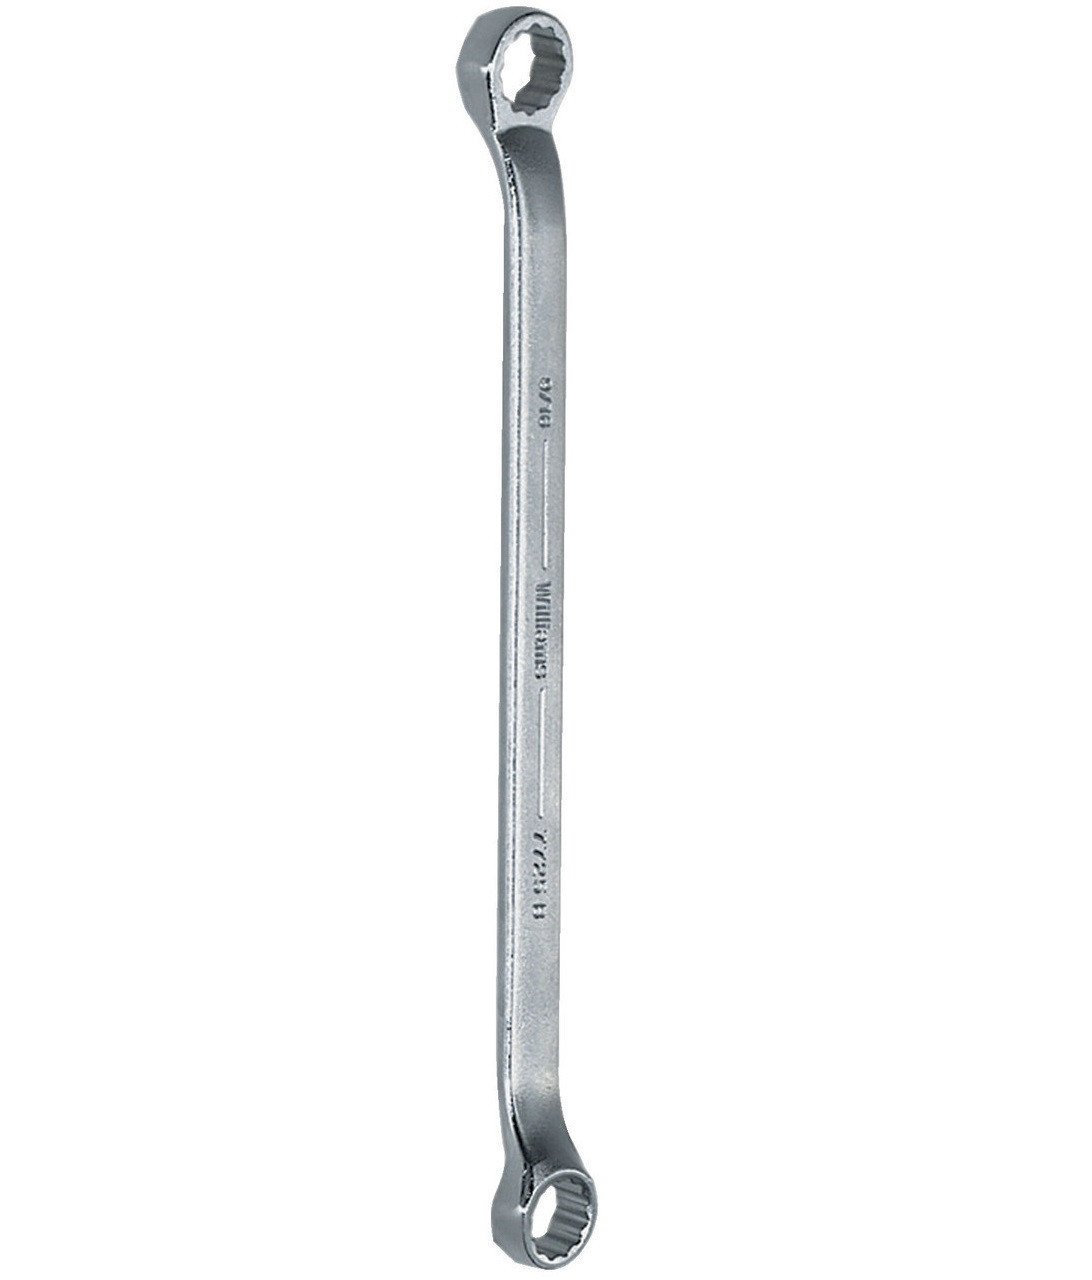 12x13MM Williams Satin Chrome Double Head 10 Degree Offset Box End Wrench 12 PT - JHWBWM-1213